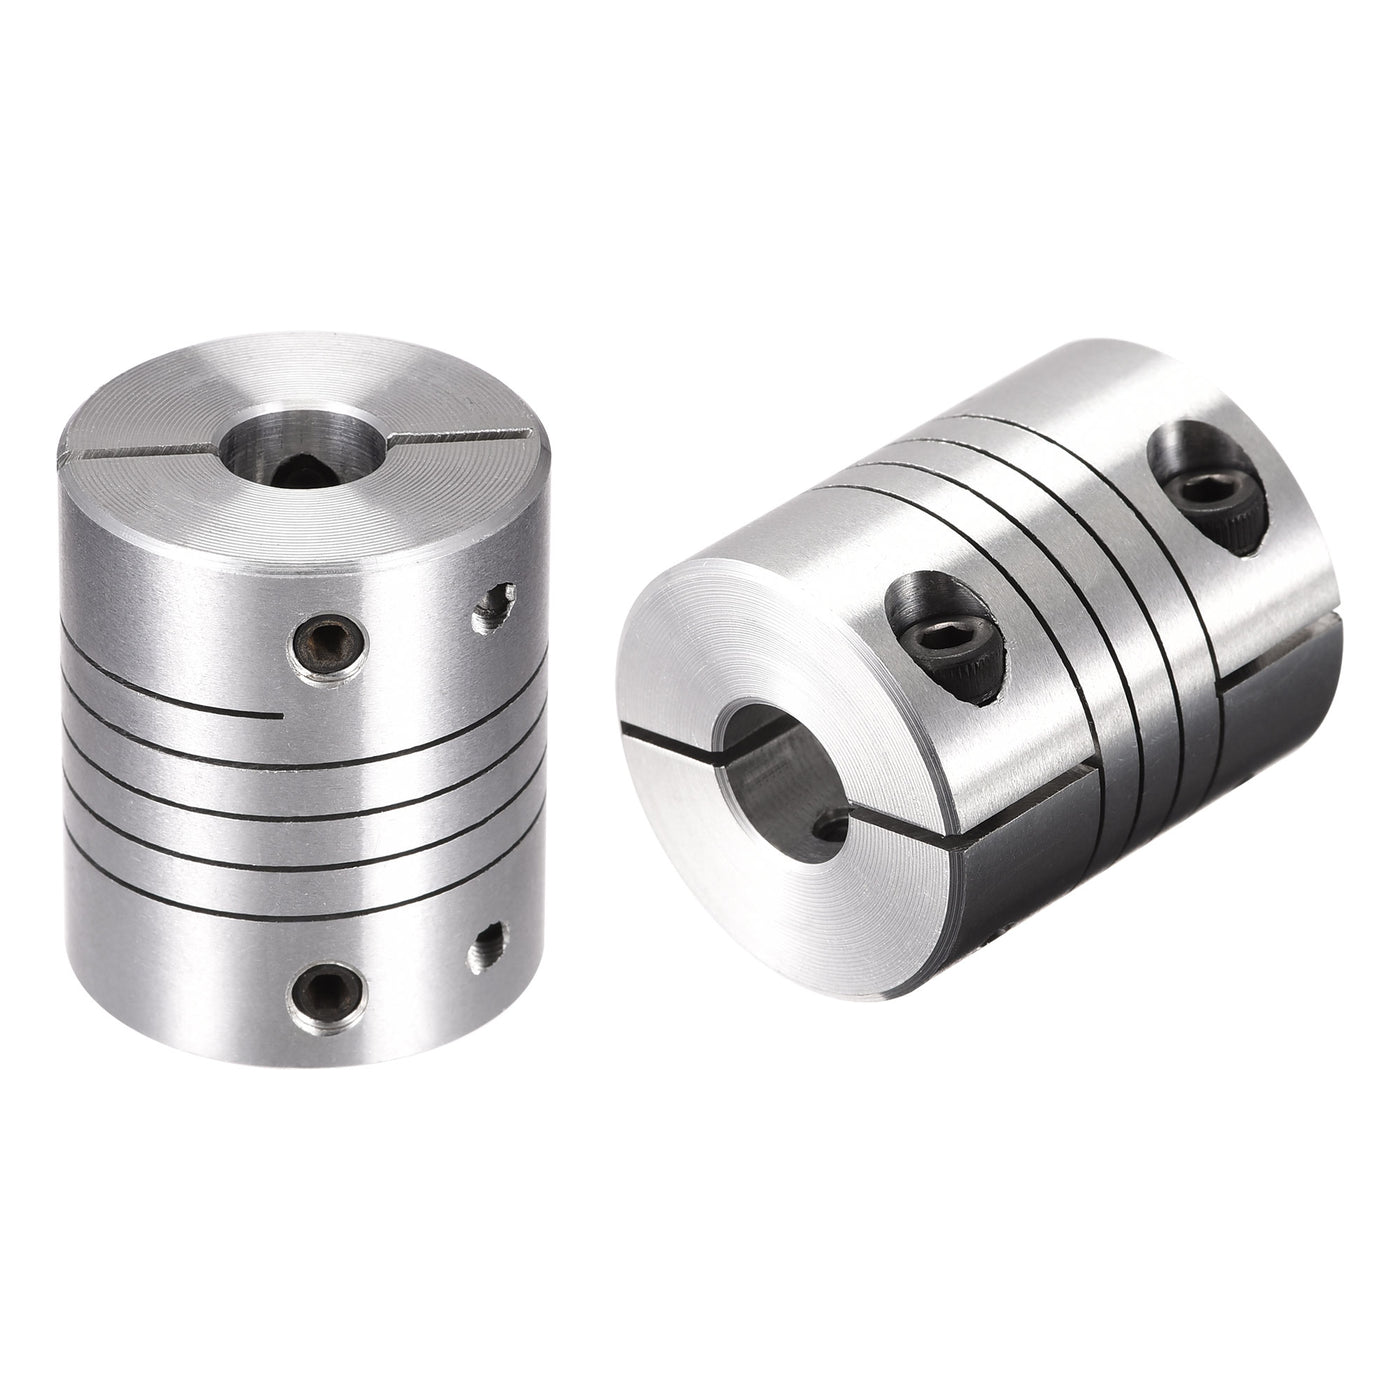 uxcell Uxcell 2PCS Motor Shaft 9mm to 10mm Helical Beam Coupler Coupling 25mm Dia 30mm Length